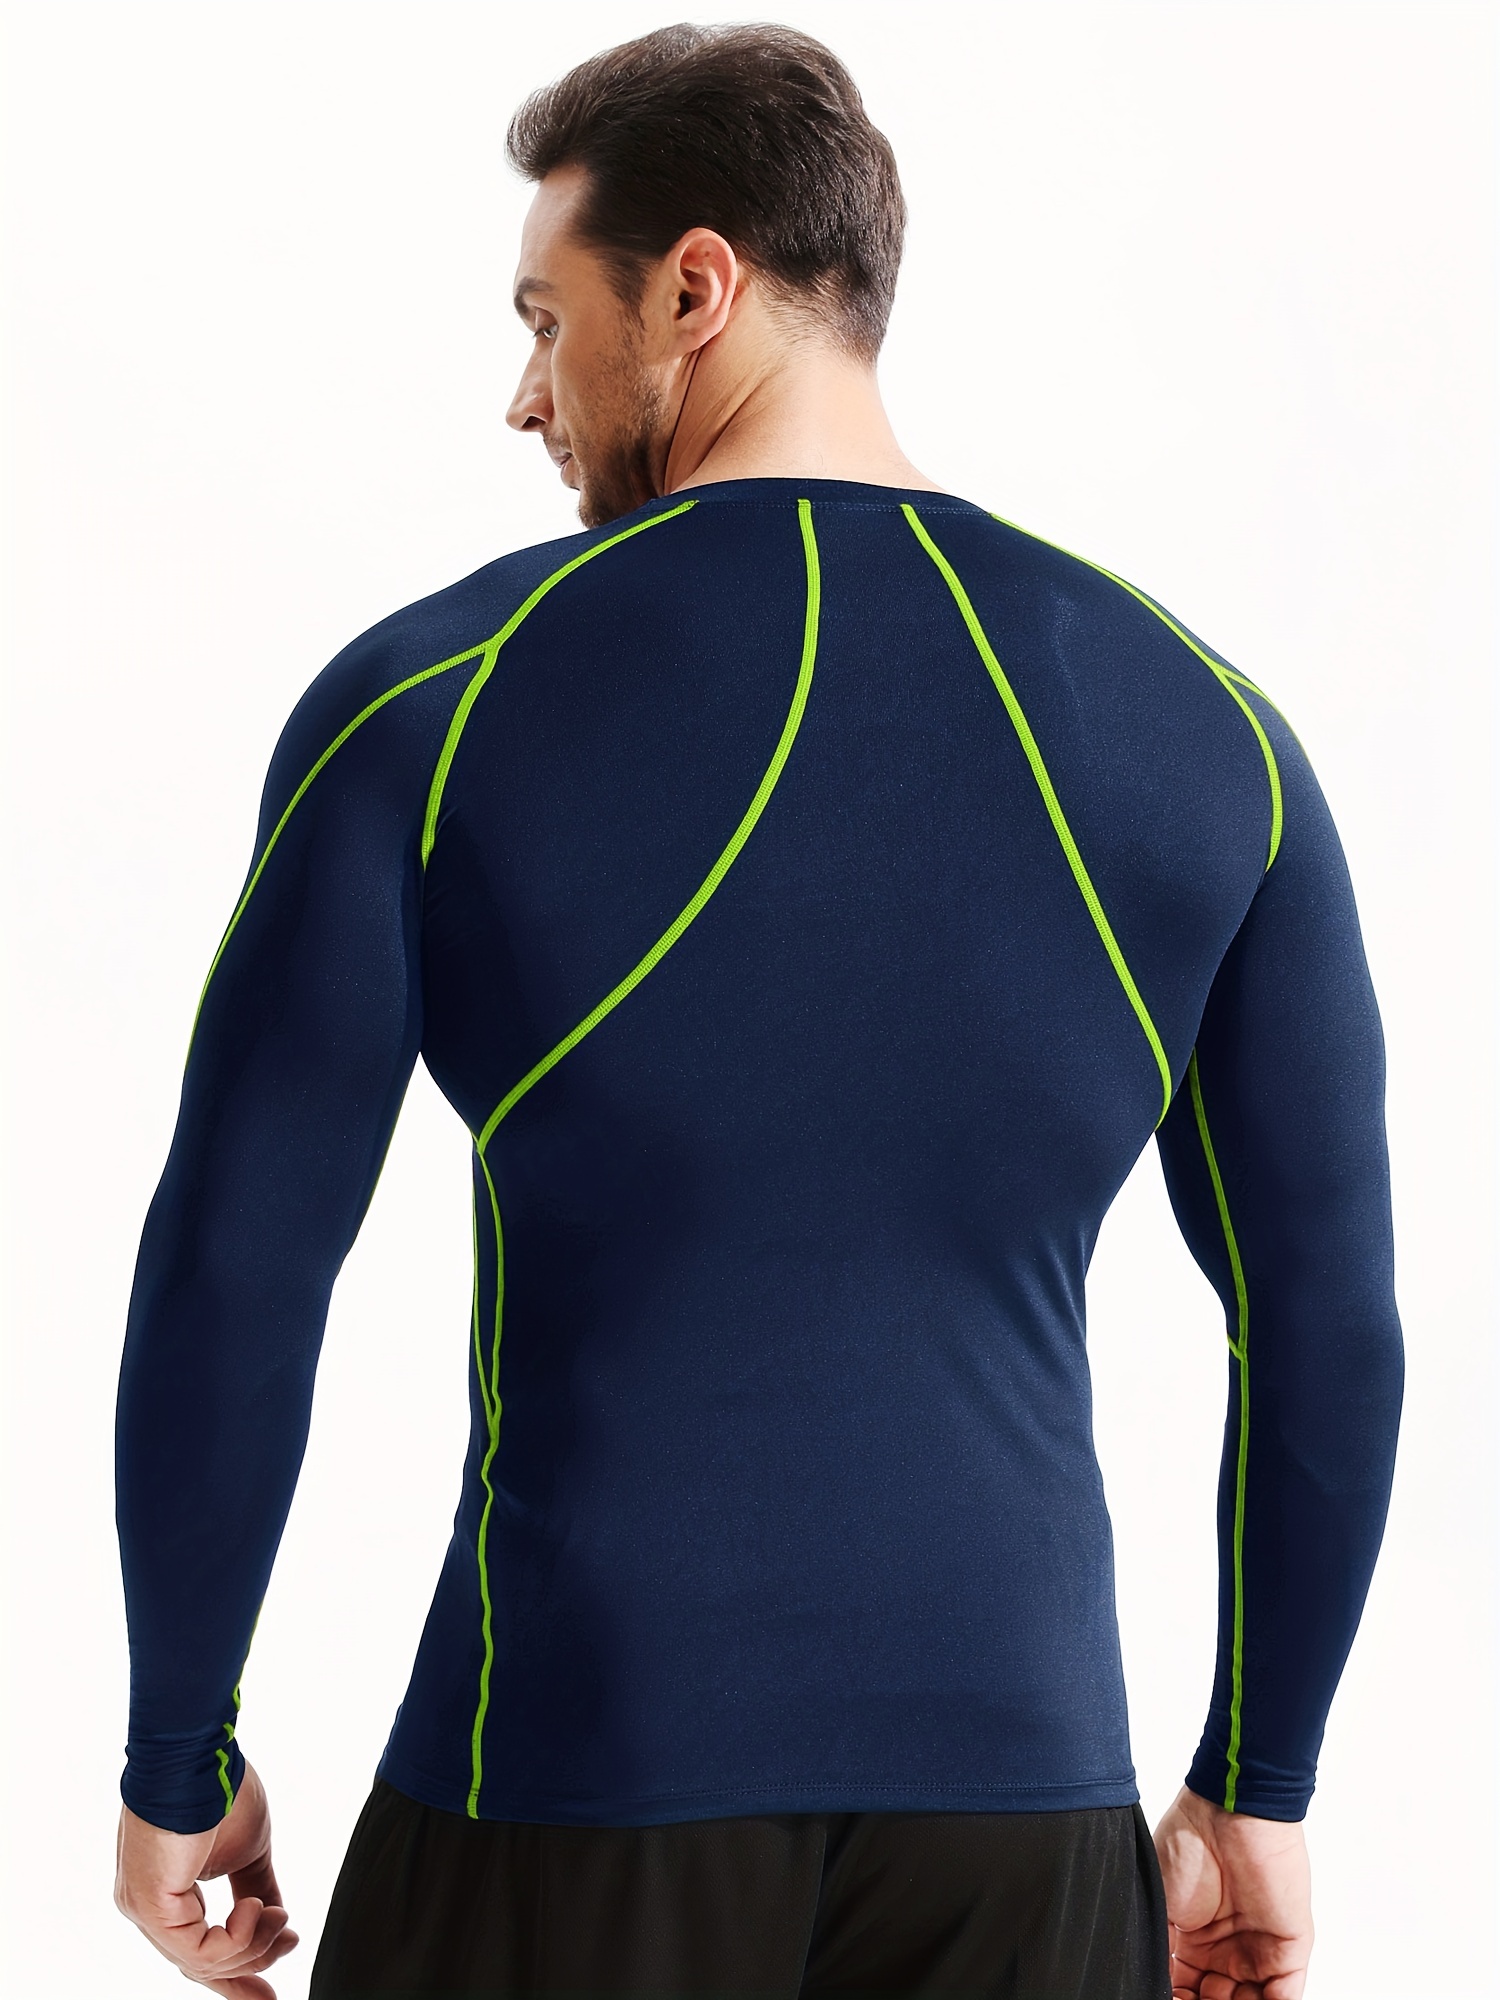 Under Armour Coldgear Baselayer Top in Blue for Men